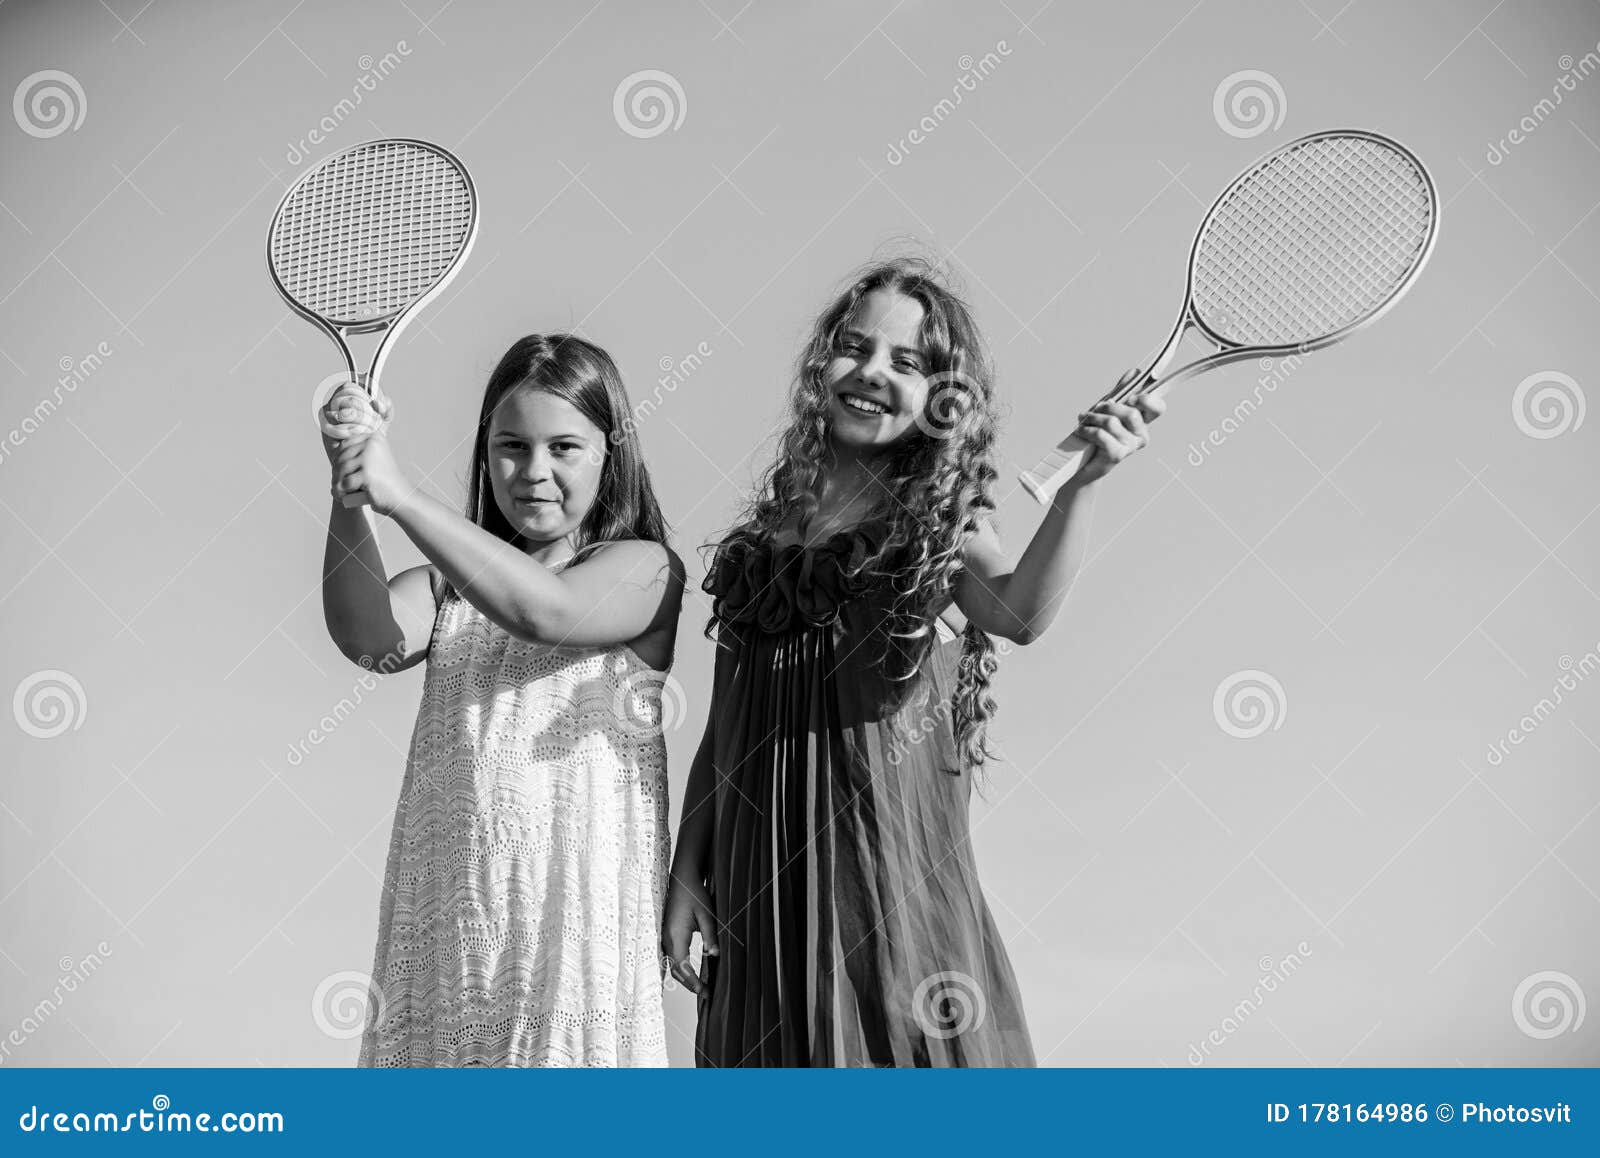 Active Life. Children Play Tennis Blue Sky Background. Sporty Kids. Small  Girls With Pink Tennis Racket. Summer Leisure Stock Photo - Image of blue,  happy: 178164986